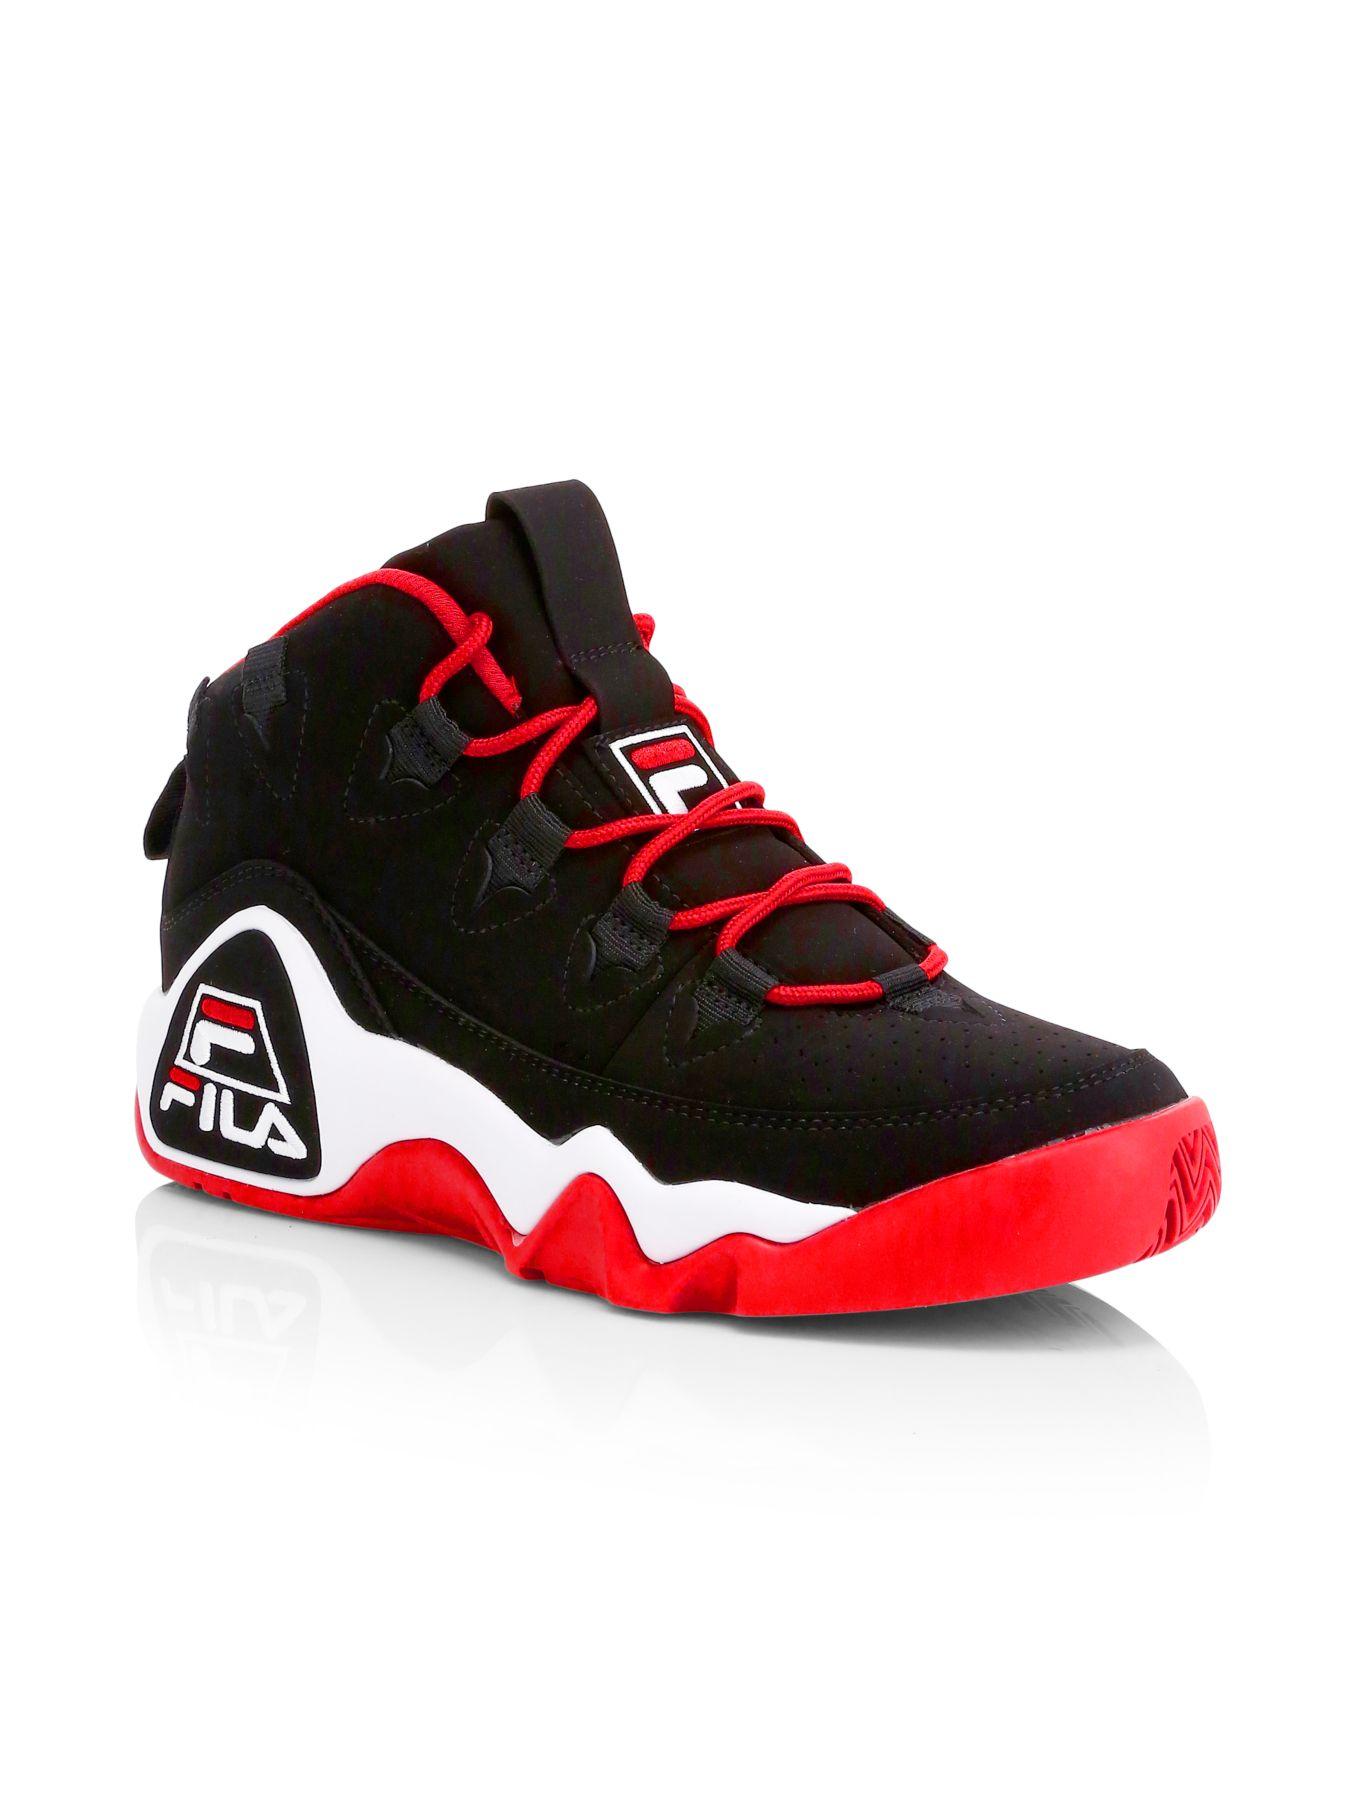 fila grant hill 1 Online Sale, UP TO 67% OFF